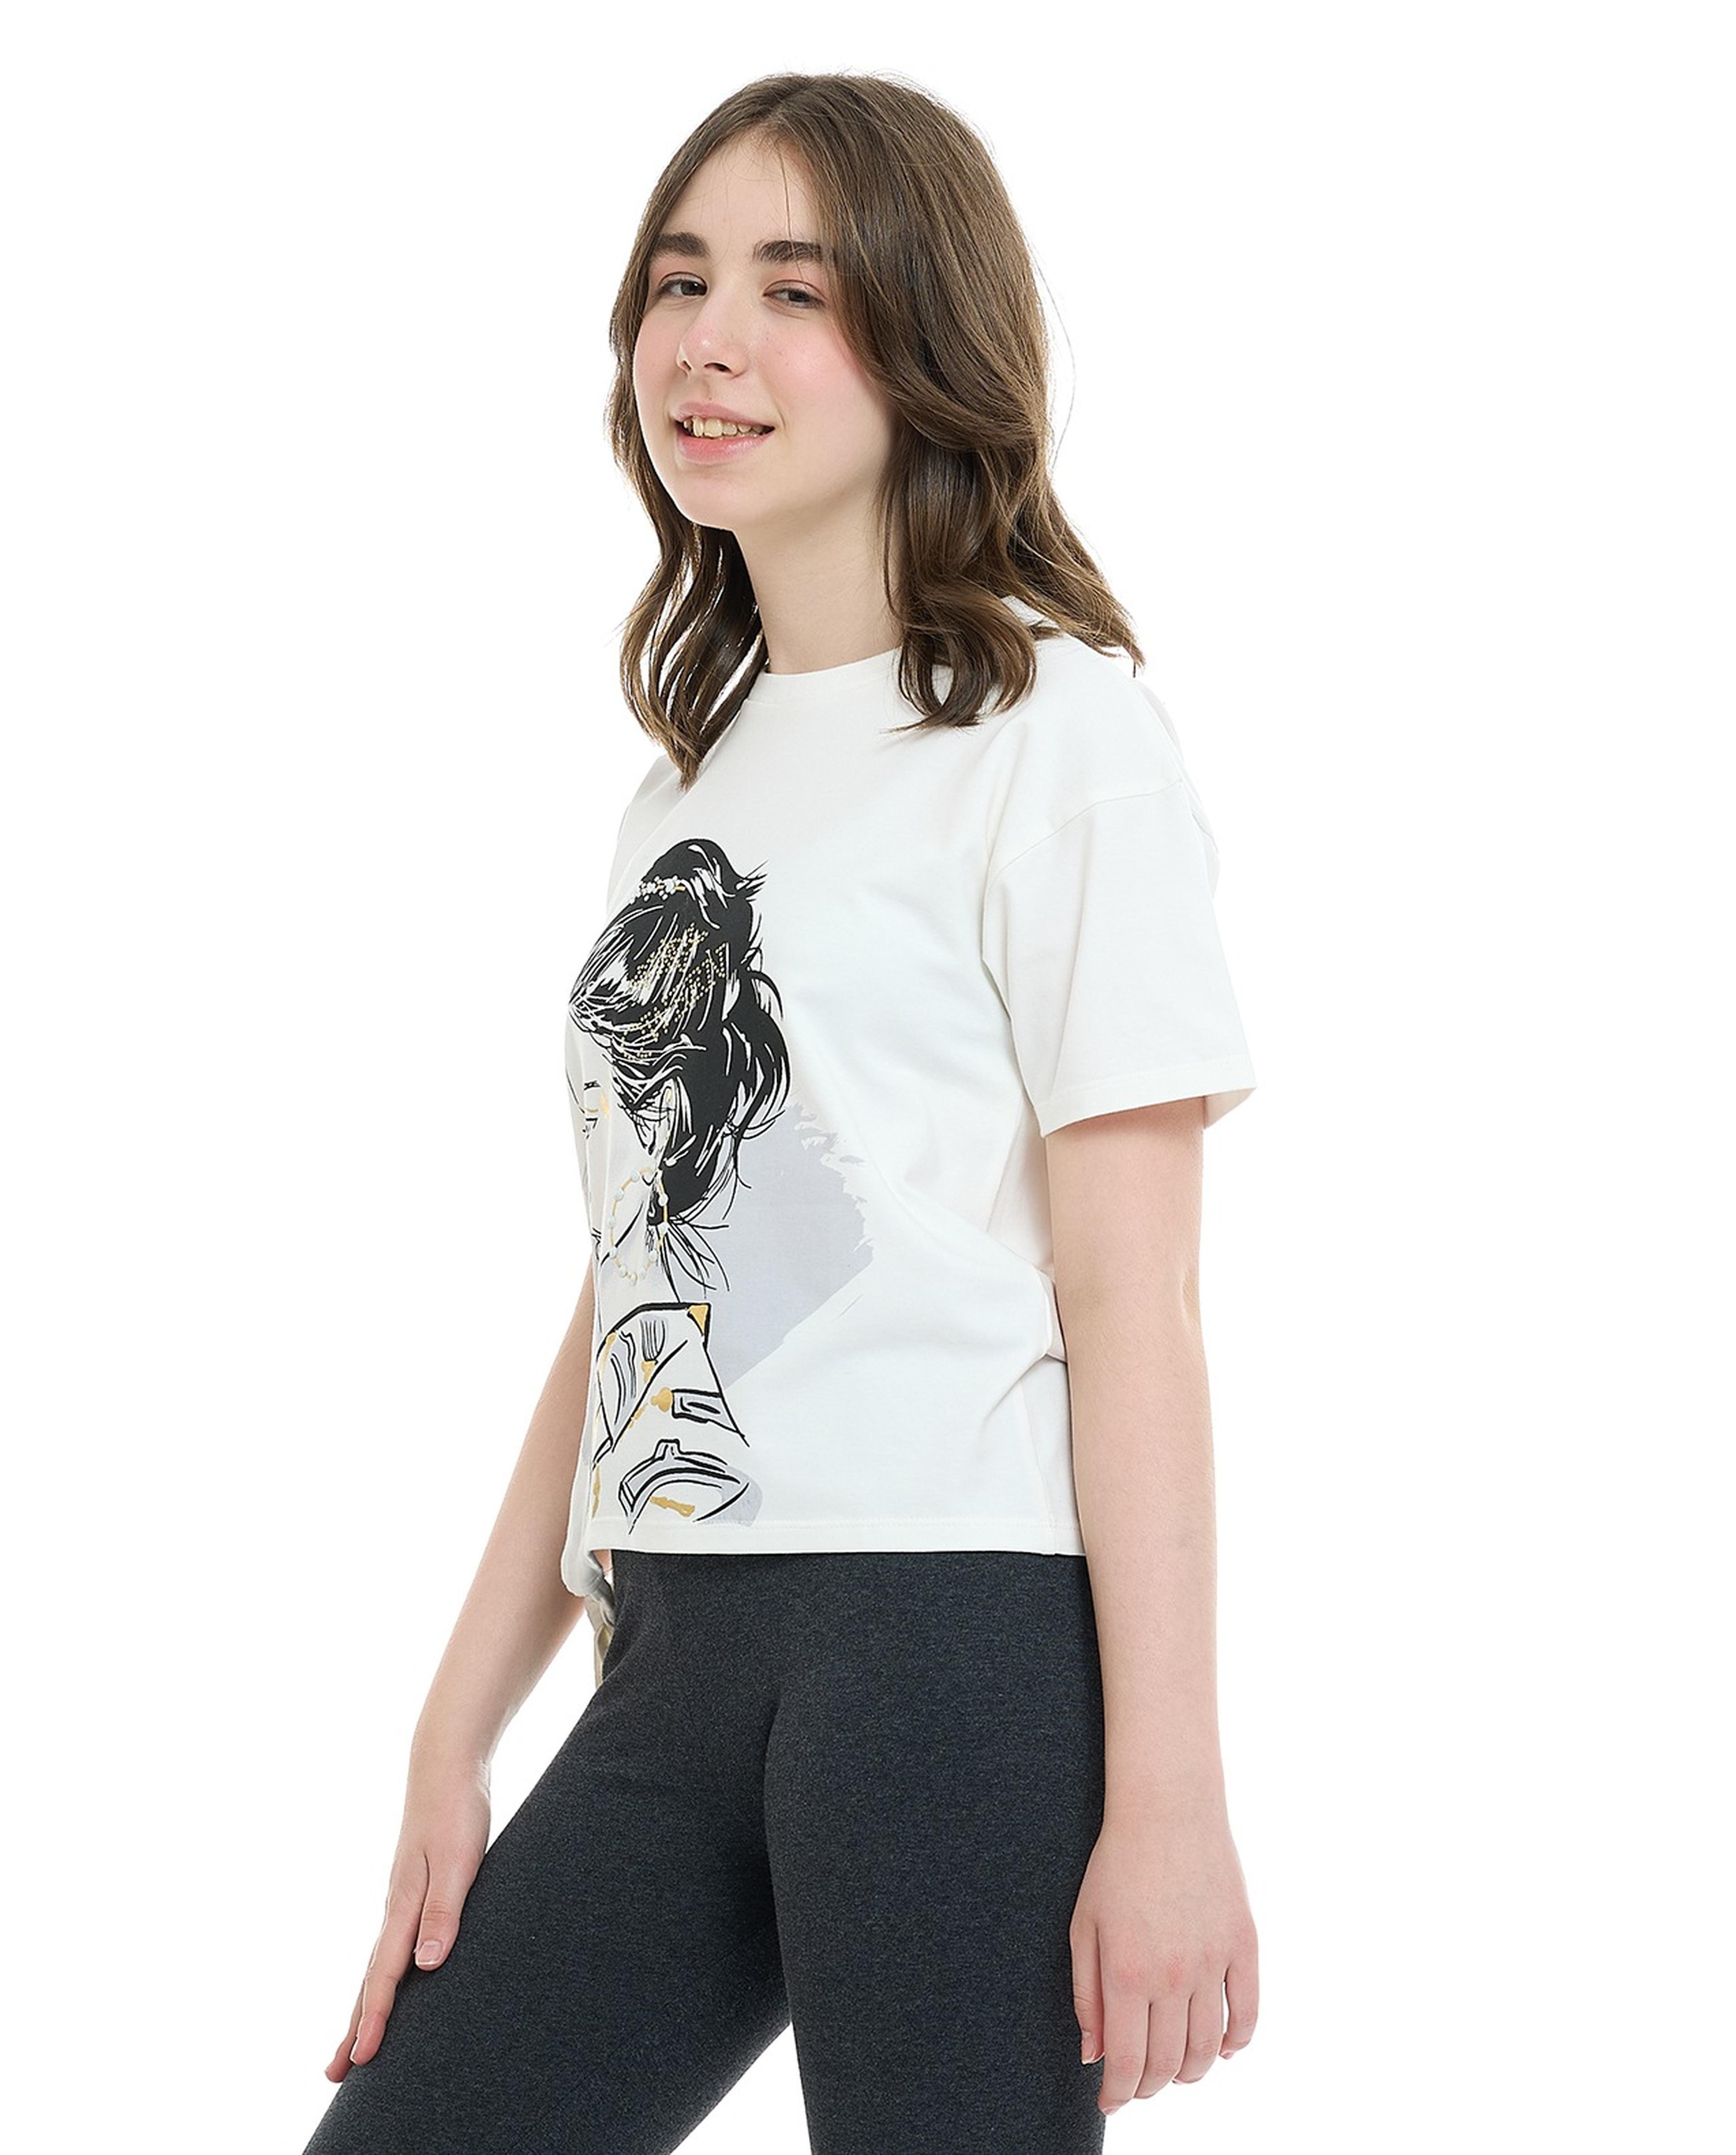 Printed Top with Crew Neck and Short Sleeves